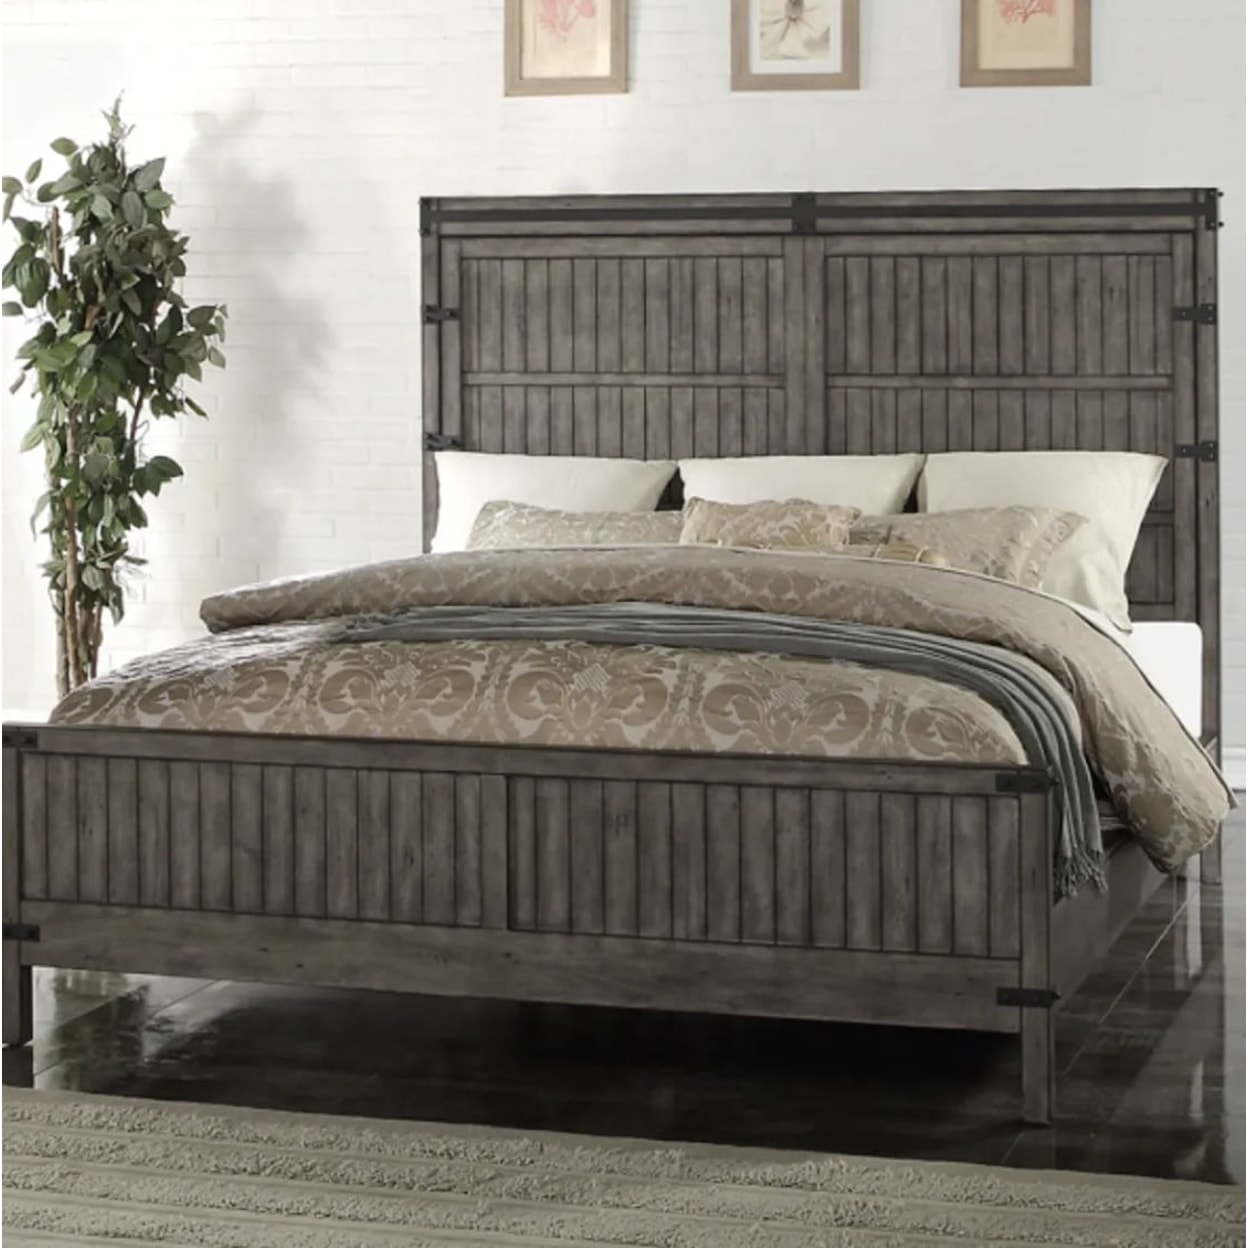 Legends Furniture Storehouse Queen Slatted Panel Bed